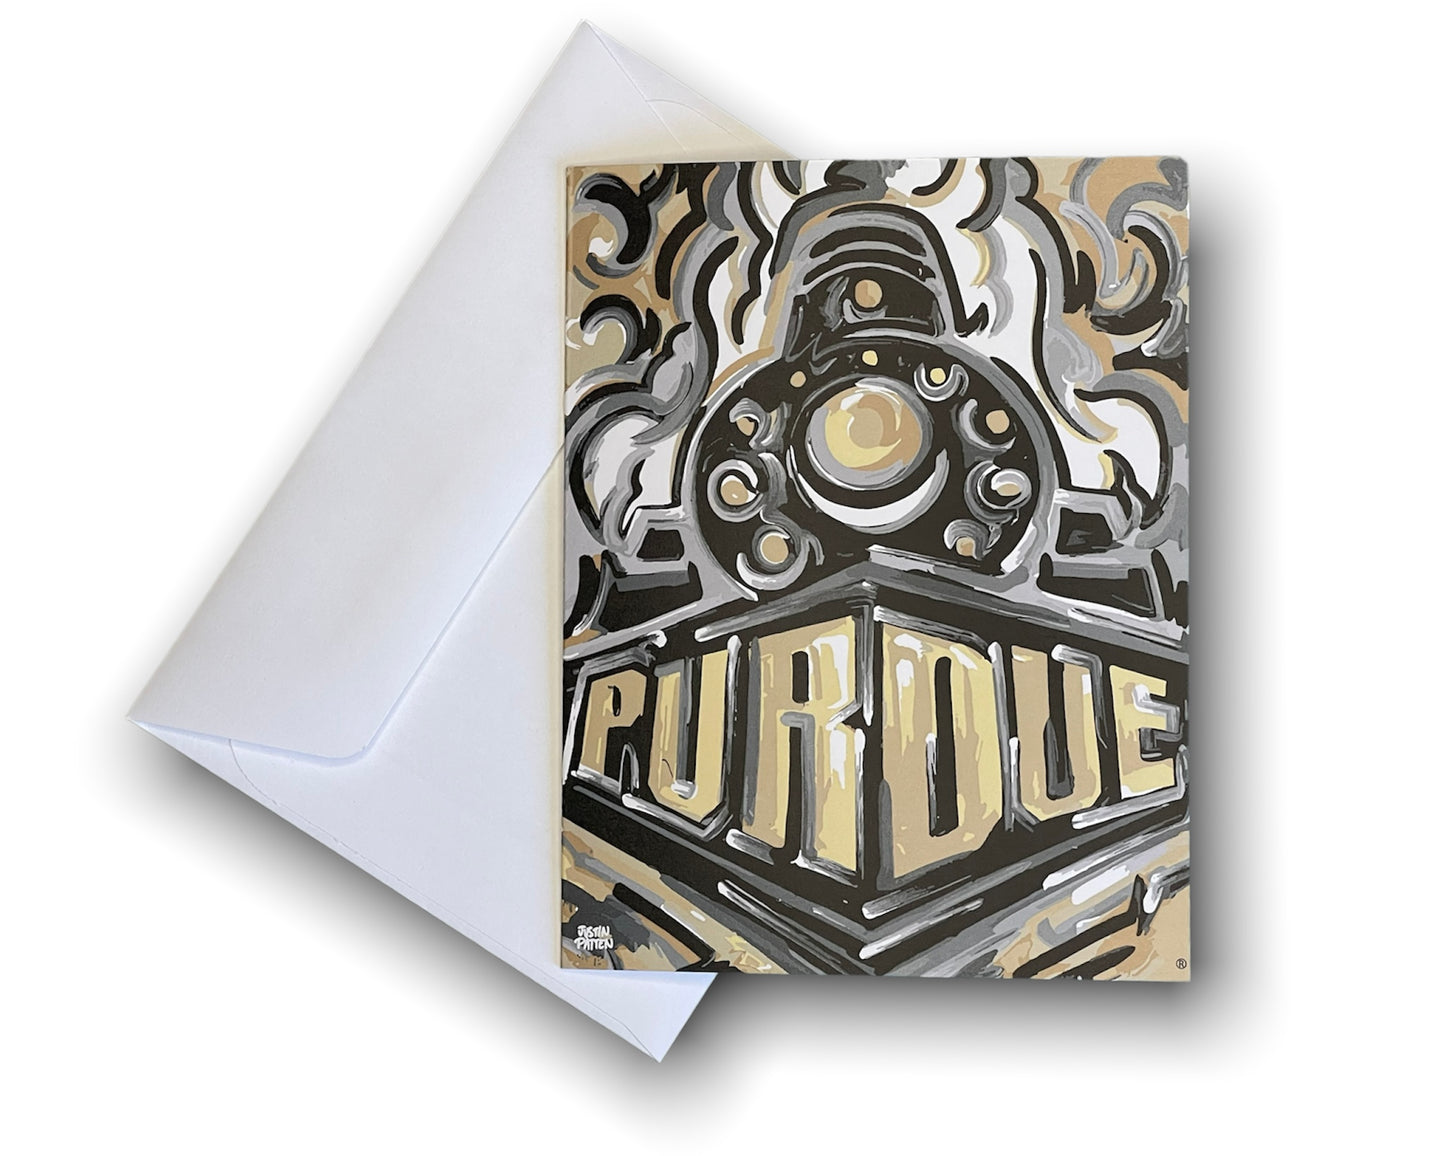 Purdue University Boilermaker Special Note Card Set of 6 by Justin Patten